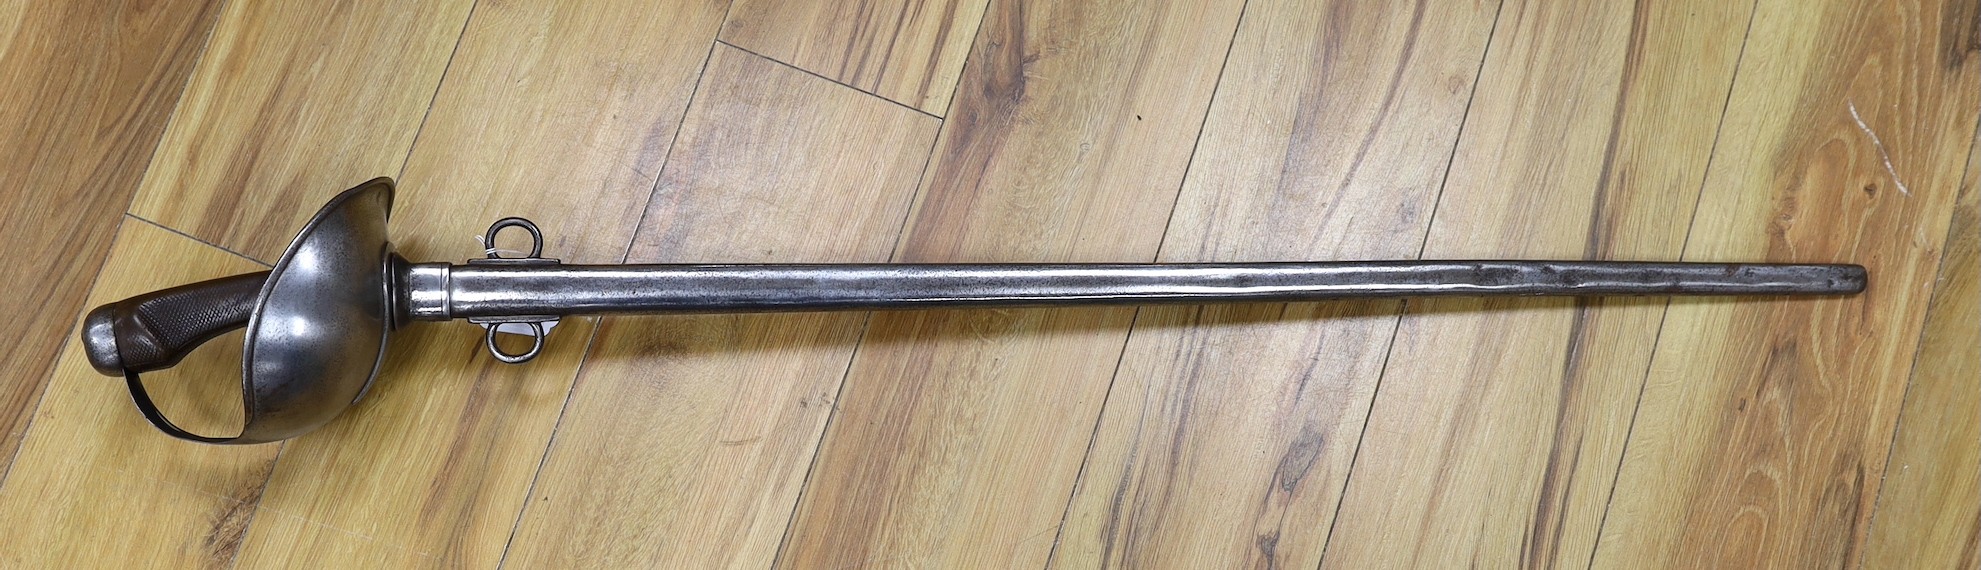 A British 1908 pattern cavalry troopers sword and scabbard by Sanderson Brothers & Neubold Limited, total length 111cm